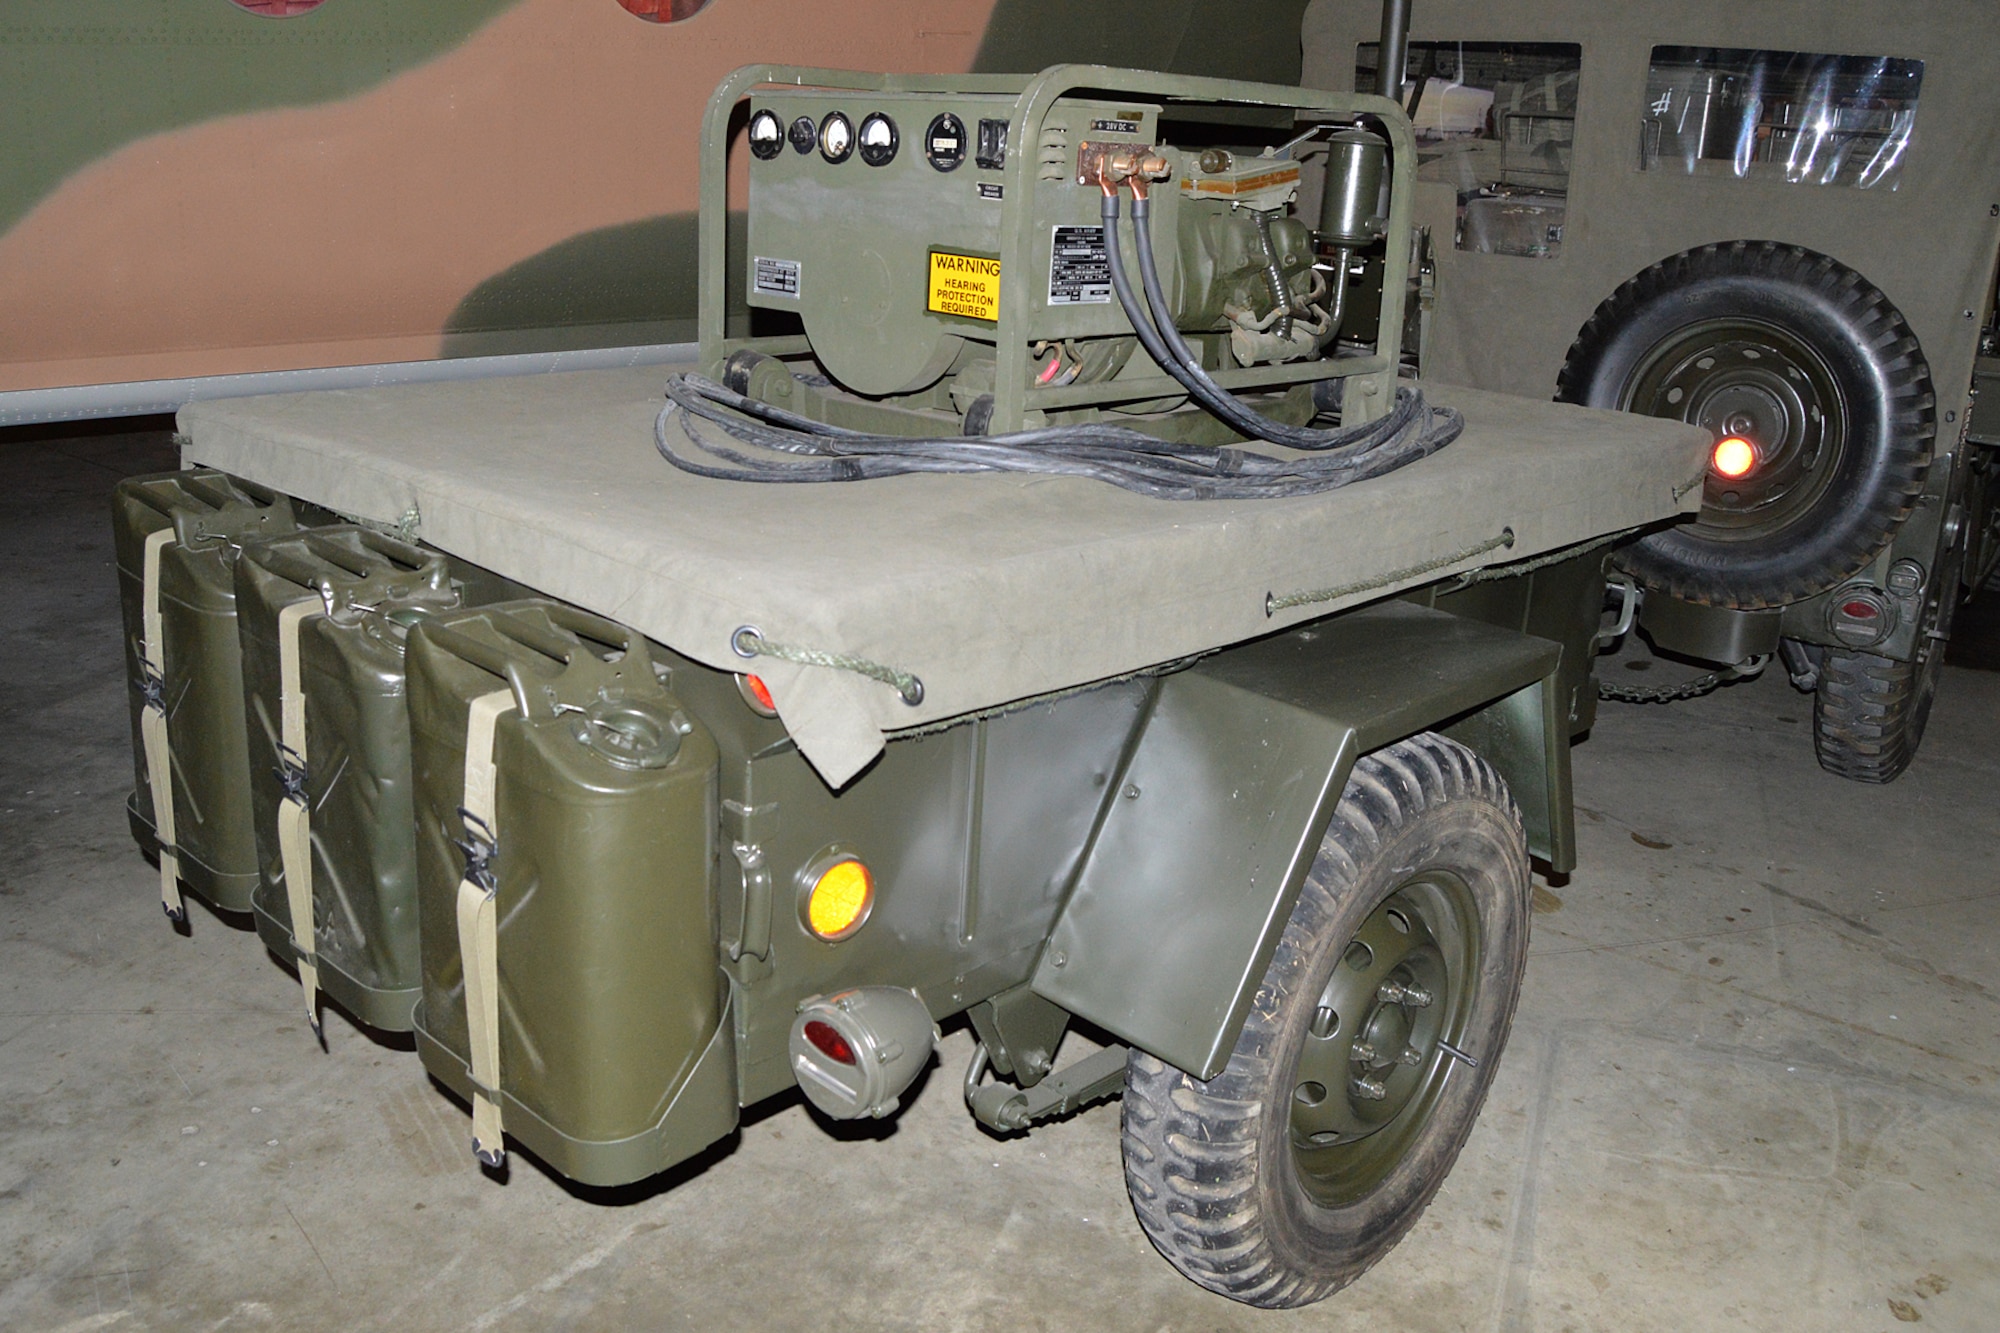 DAYTON, Ohio -- Generator and trailer for the AN/MRC-108 Communication System on display in the Southeast Asia War Gallery at the National Museum of the U.S. Air Force. (U.S. Air Force photo) 
